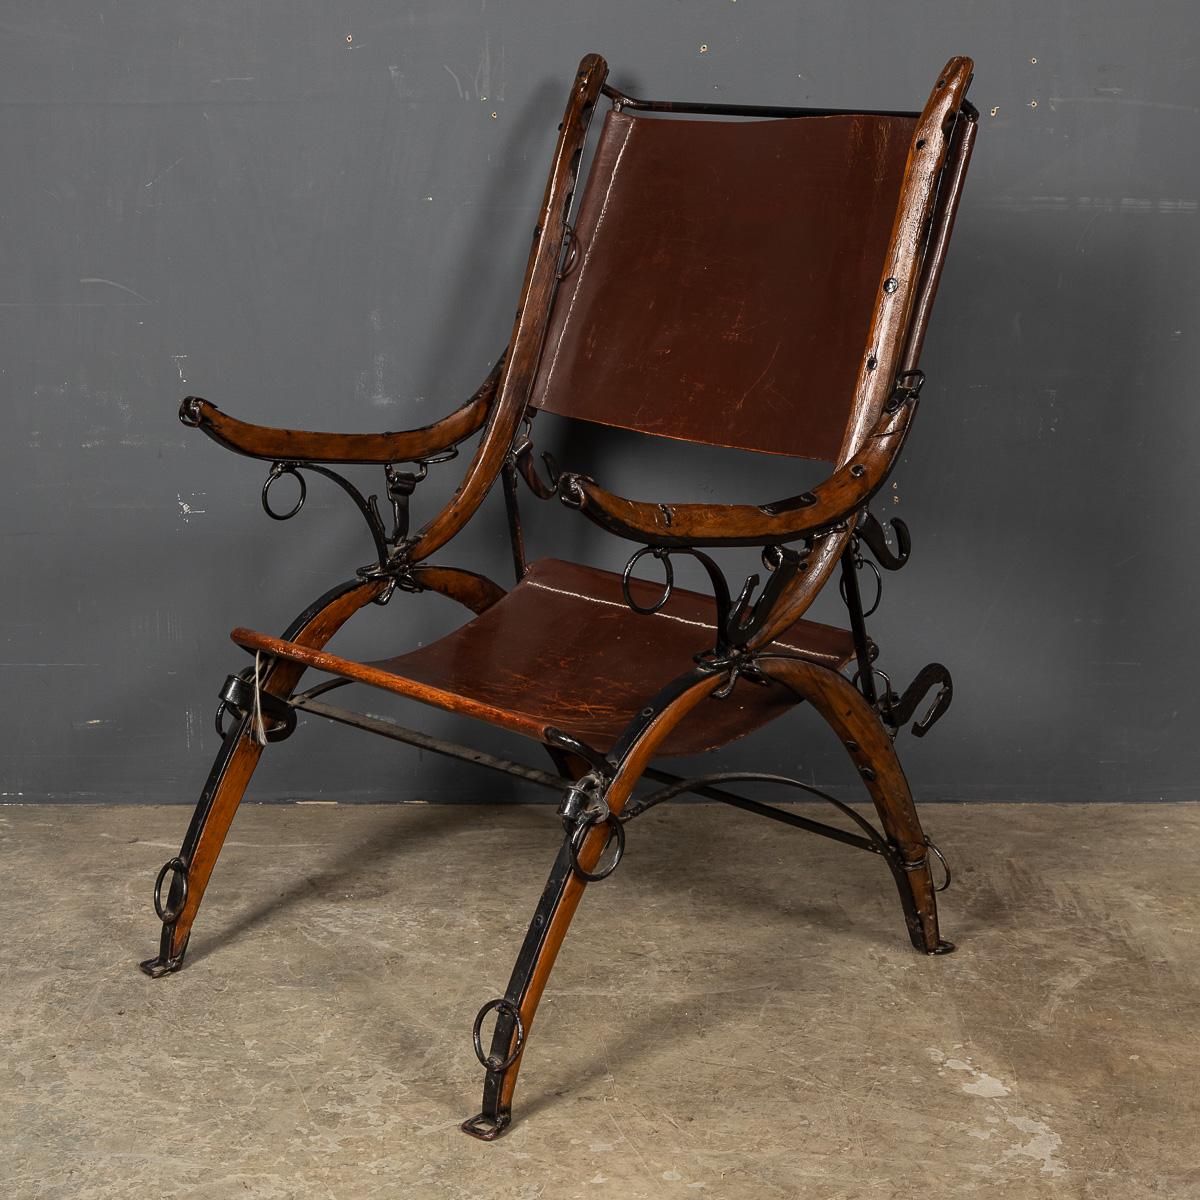 A strikingly unique chair, crafted around the turn of the 20th Century, fashioned from carriage harness holders with a leather seat and backrest. This distinctive piece showcases ring hooks on the armrests and legs, originally designed to tether a